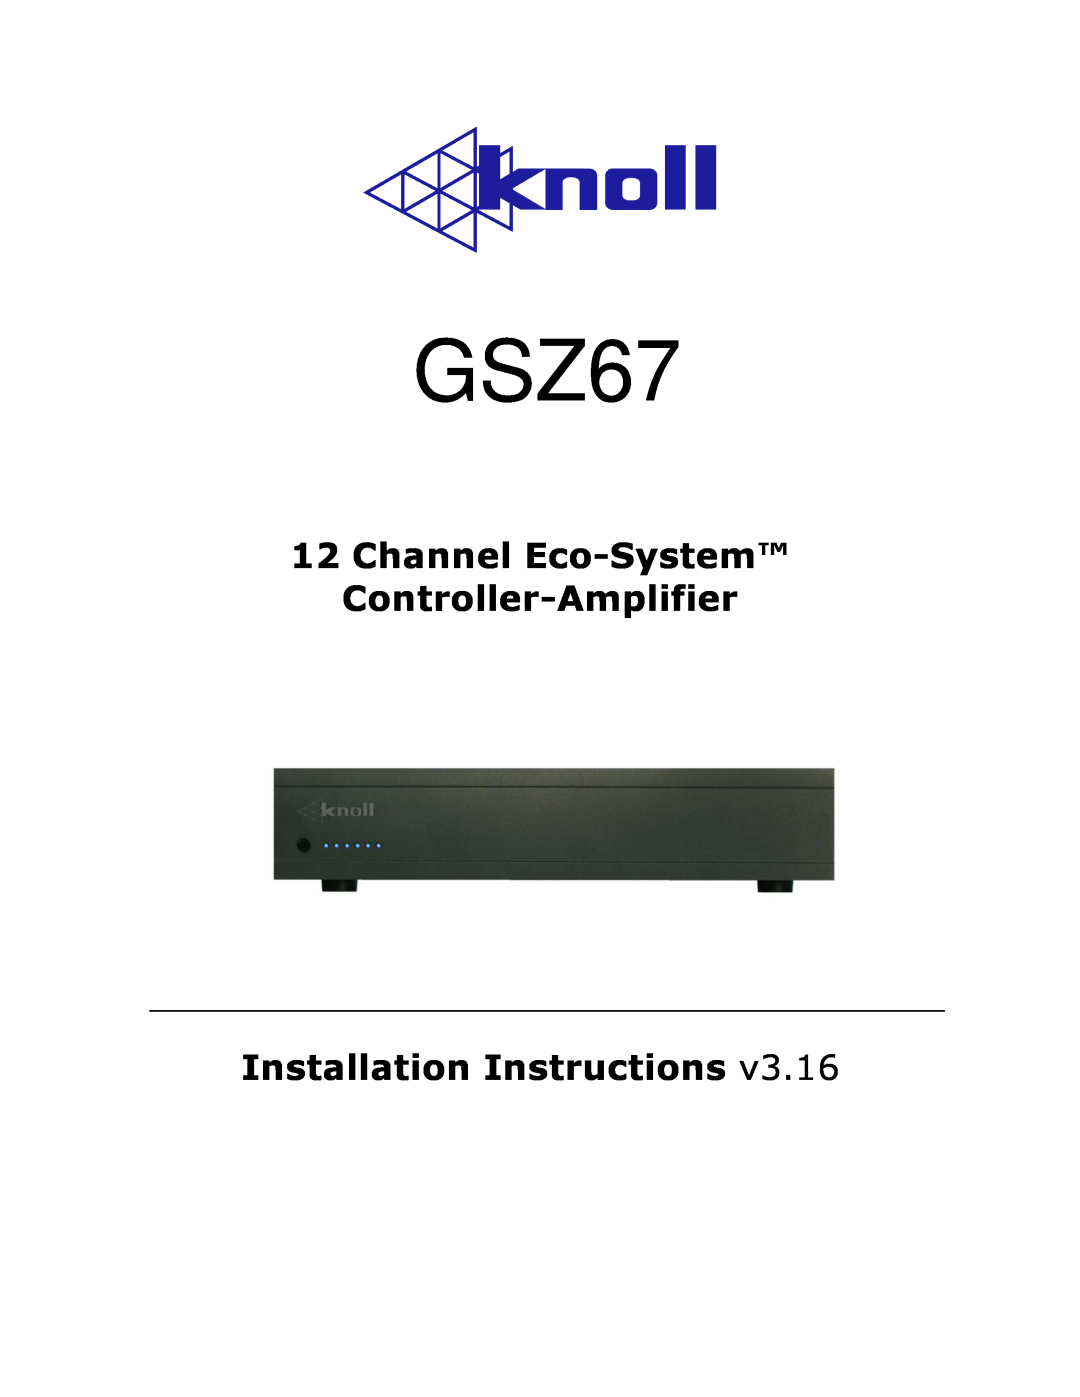 Knoll GSZ67 installation instructions 12Channel Eco-System Controller-Amplifier, Installation Instructions 